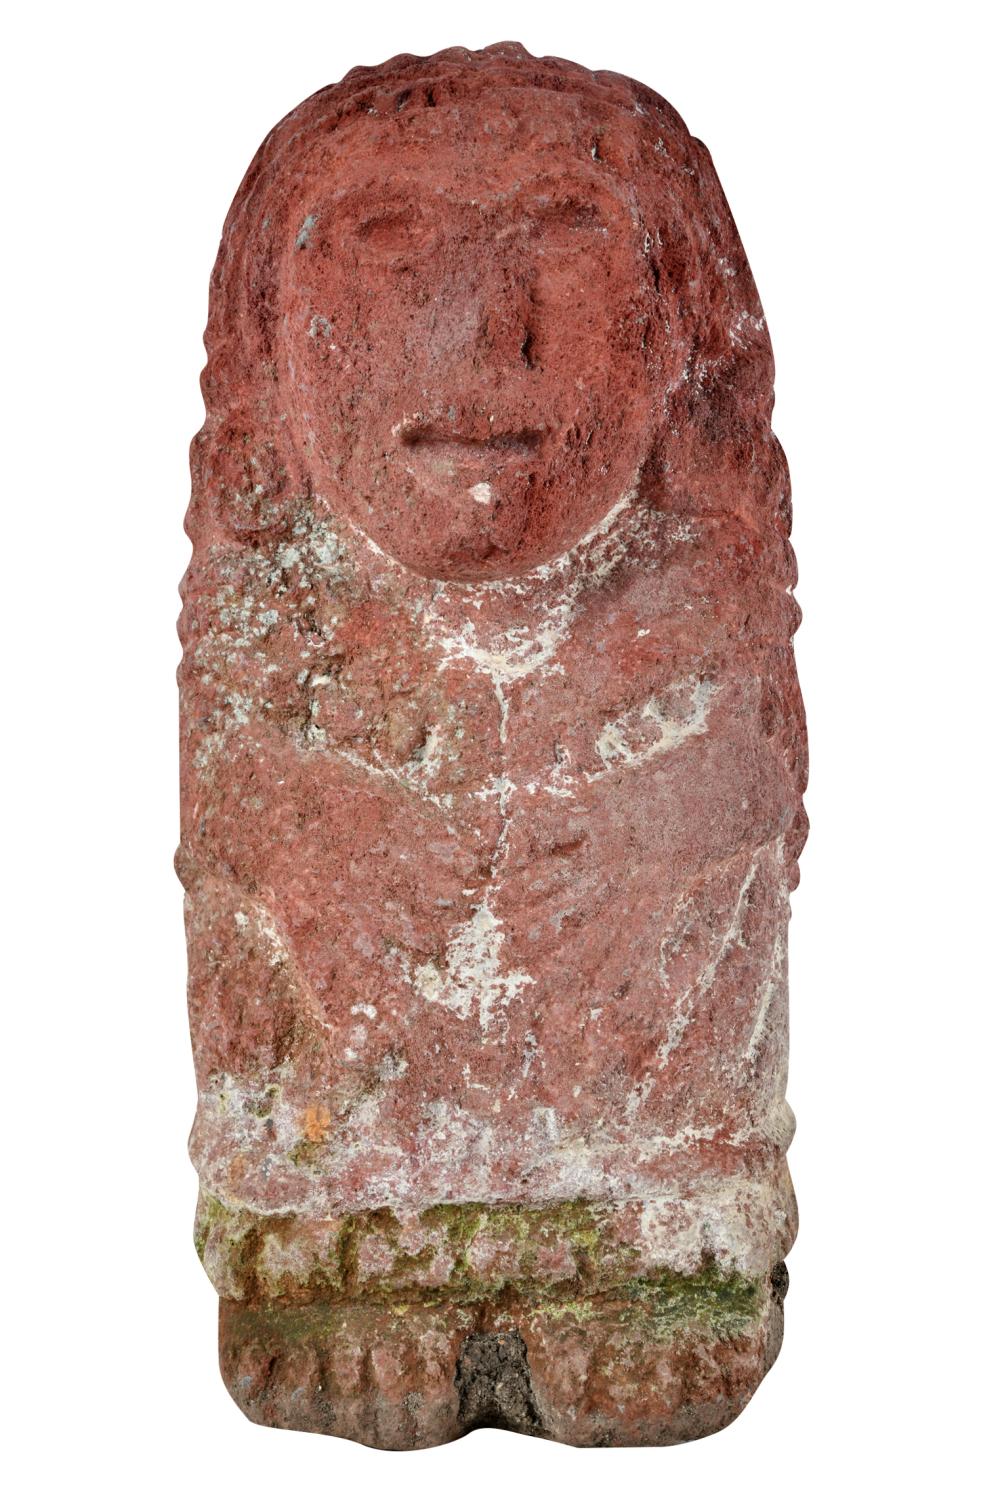 ARCHAIC STYLE CARVED STONE FIGUREThe 332961